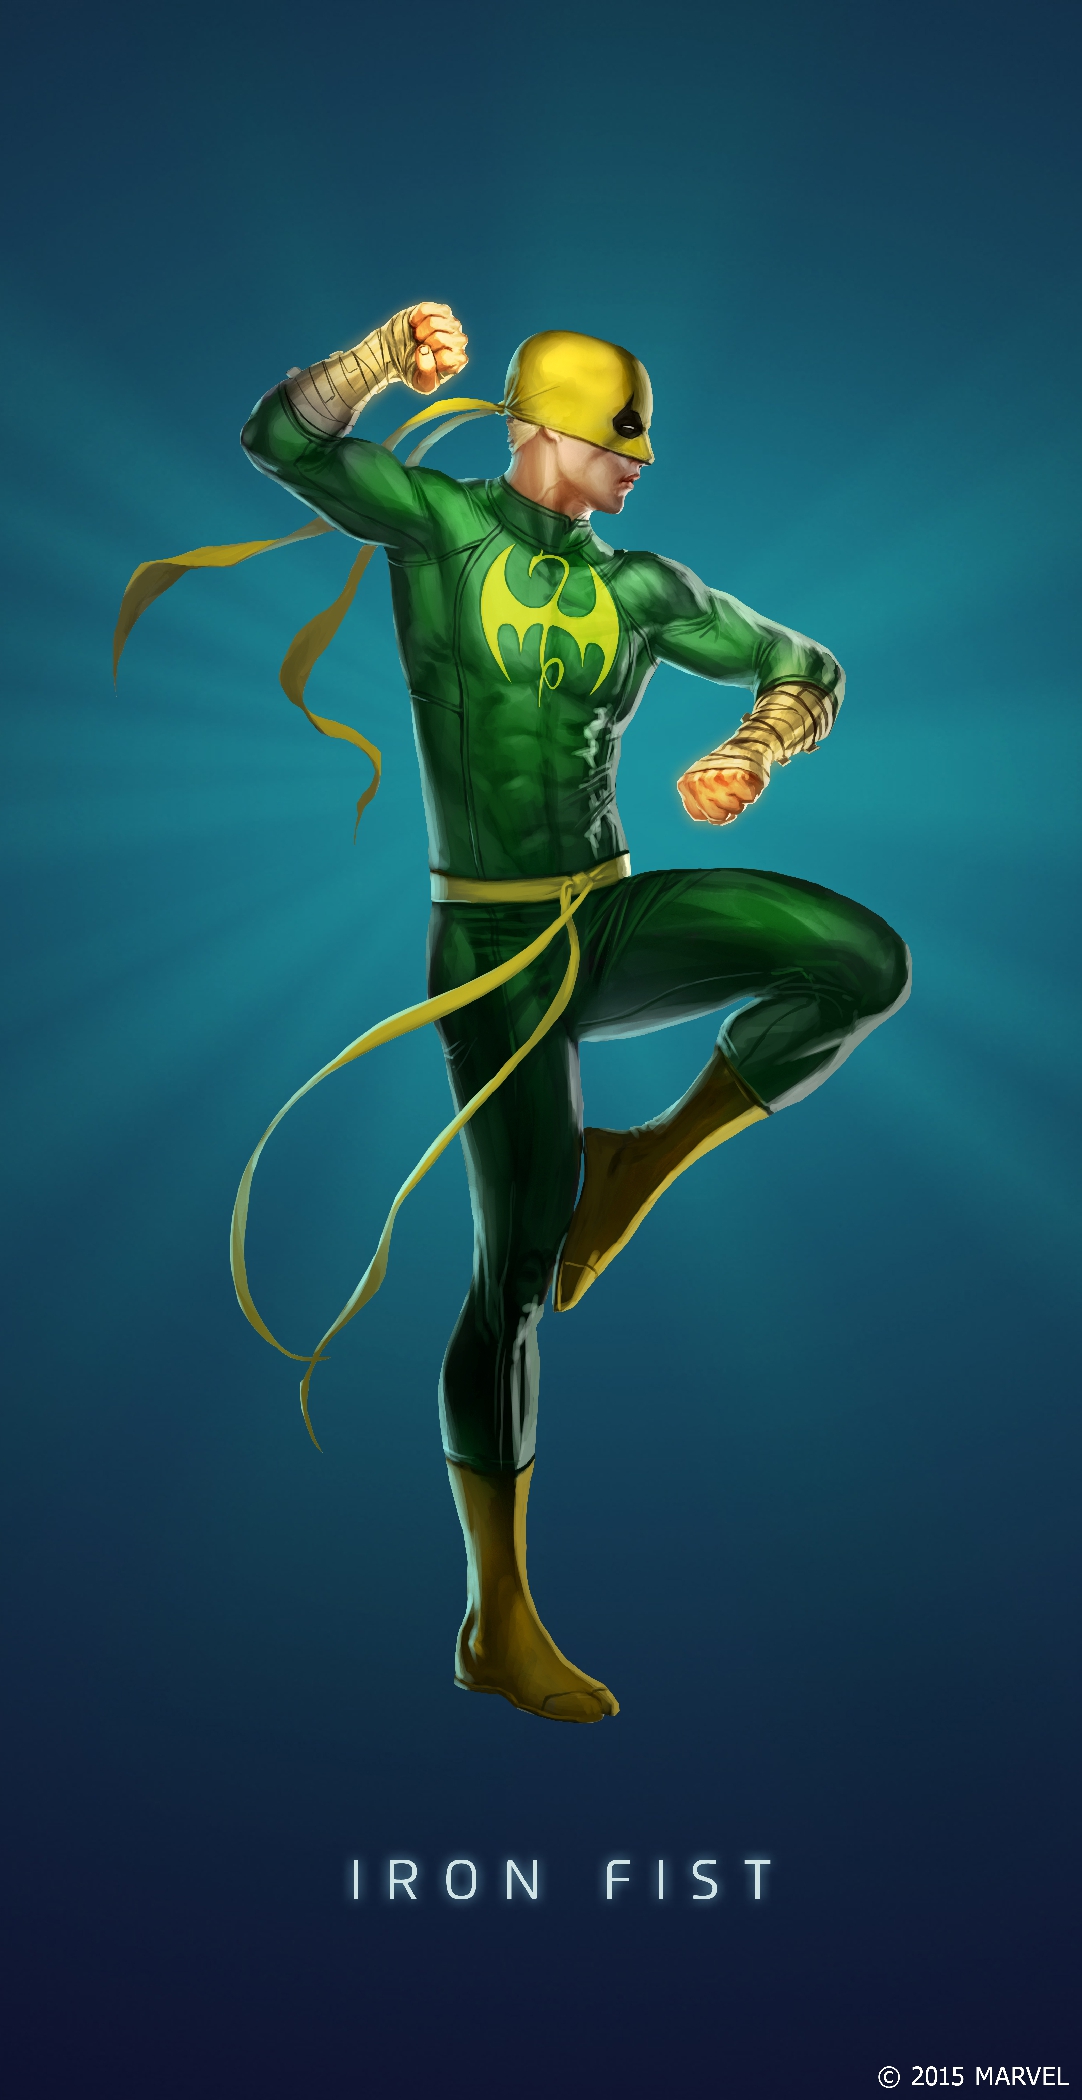 Iron Fist Wallpapers, Amazing Iron Fist Images - Iron Fist Wallpaper Iphone - HD Wallpaper 